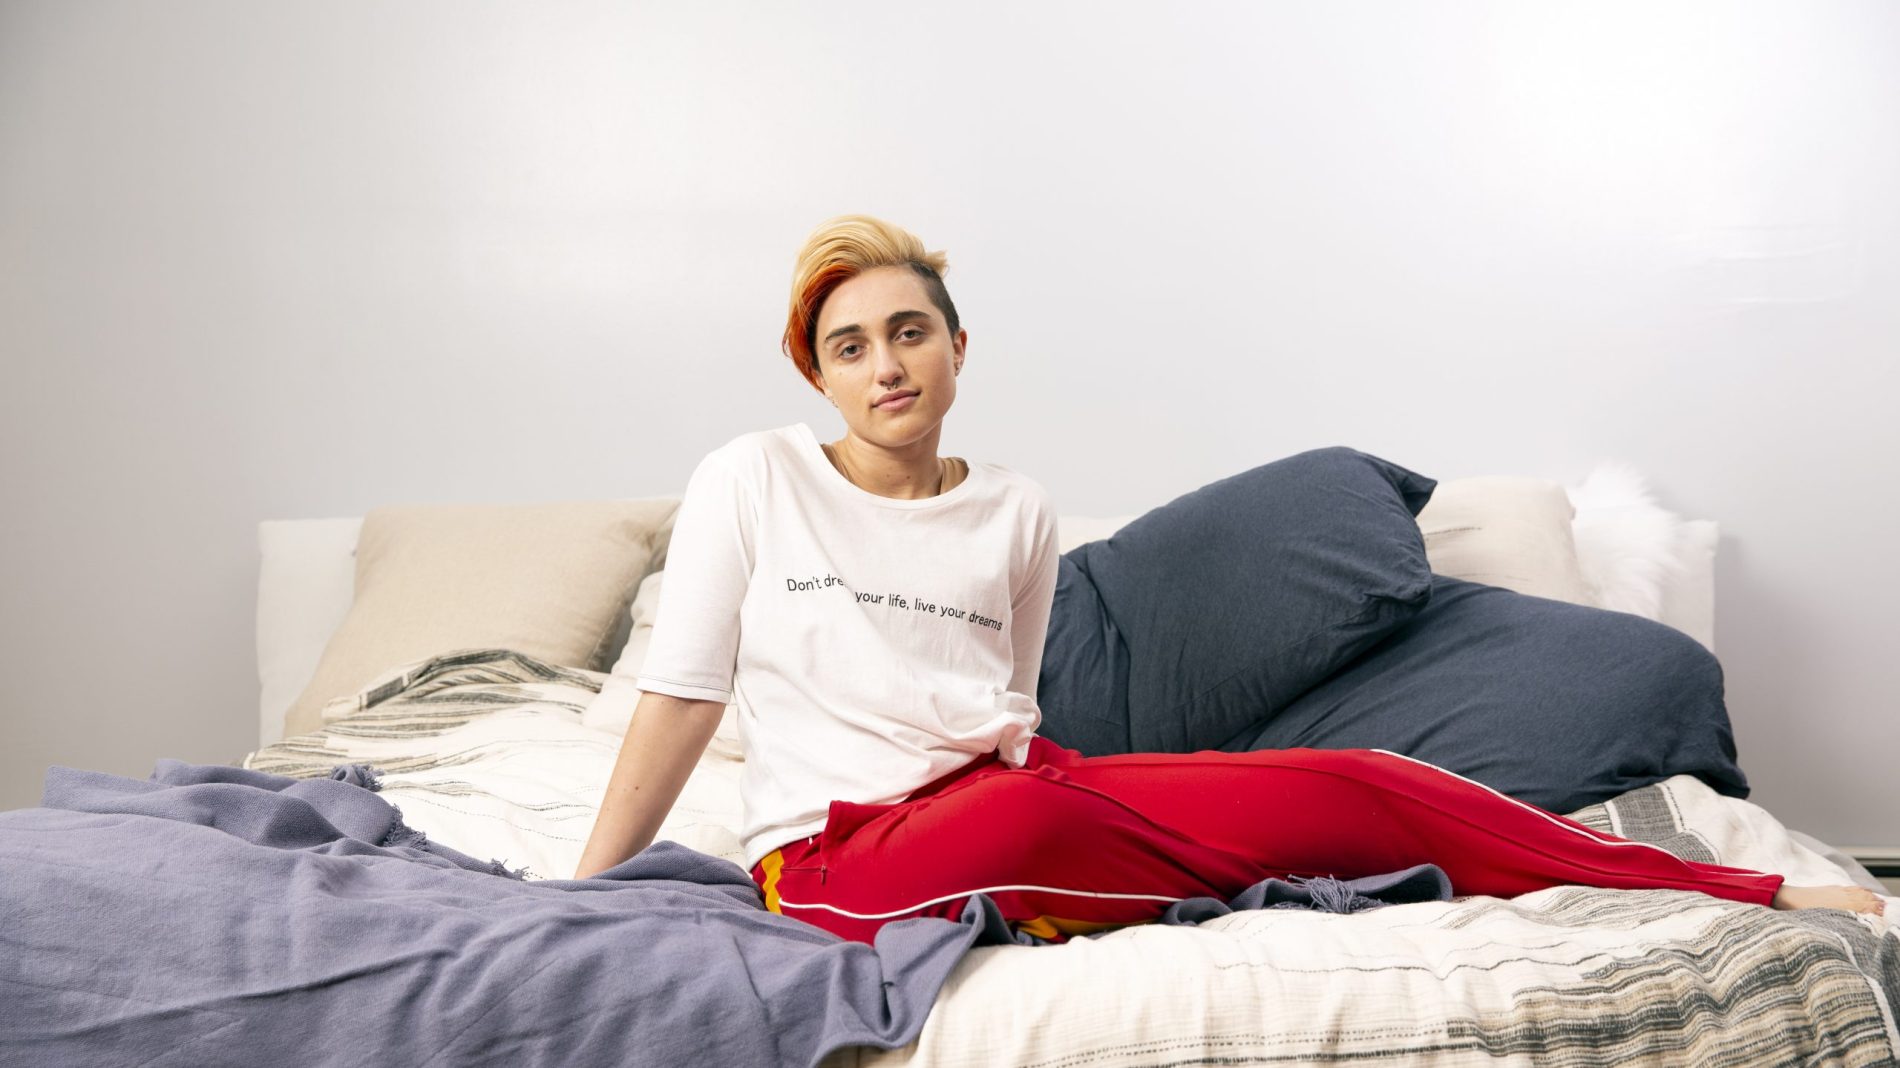 A trans young person sitting on a bed